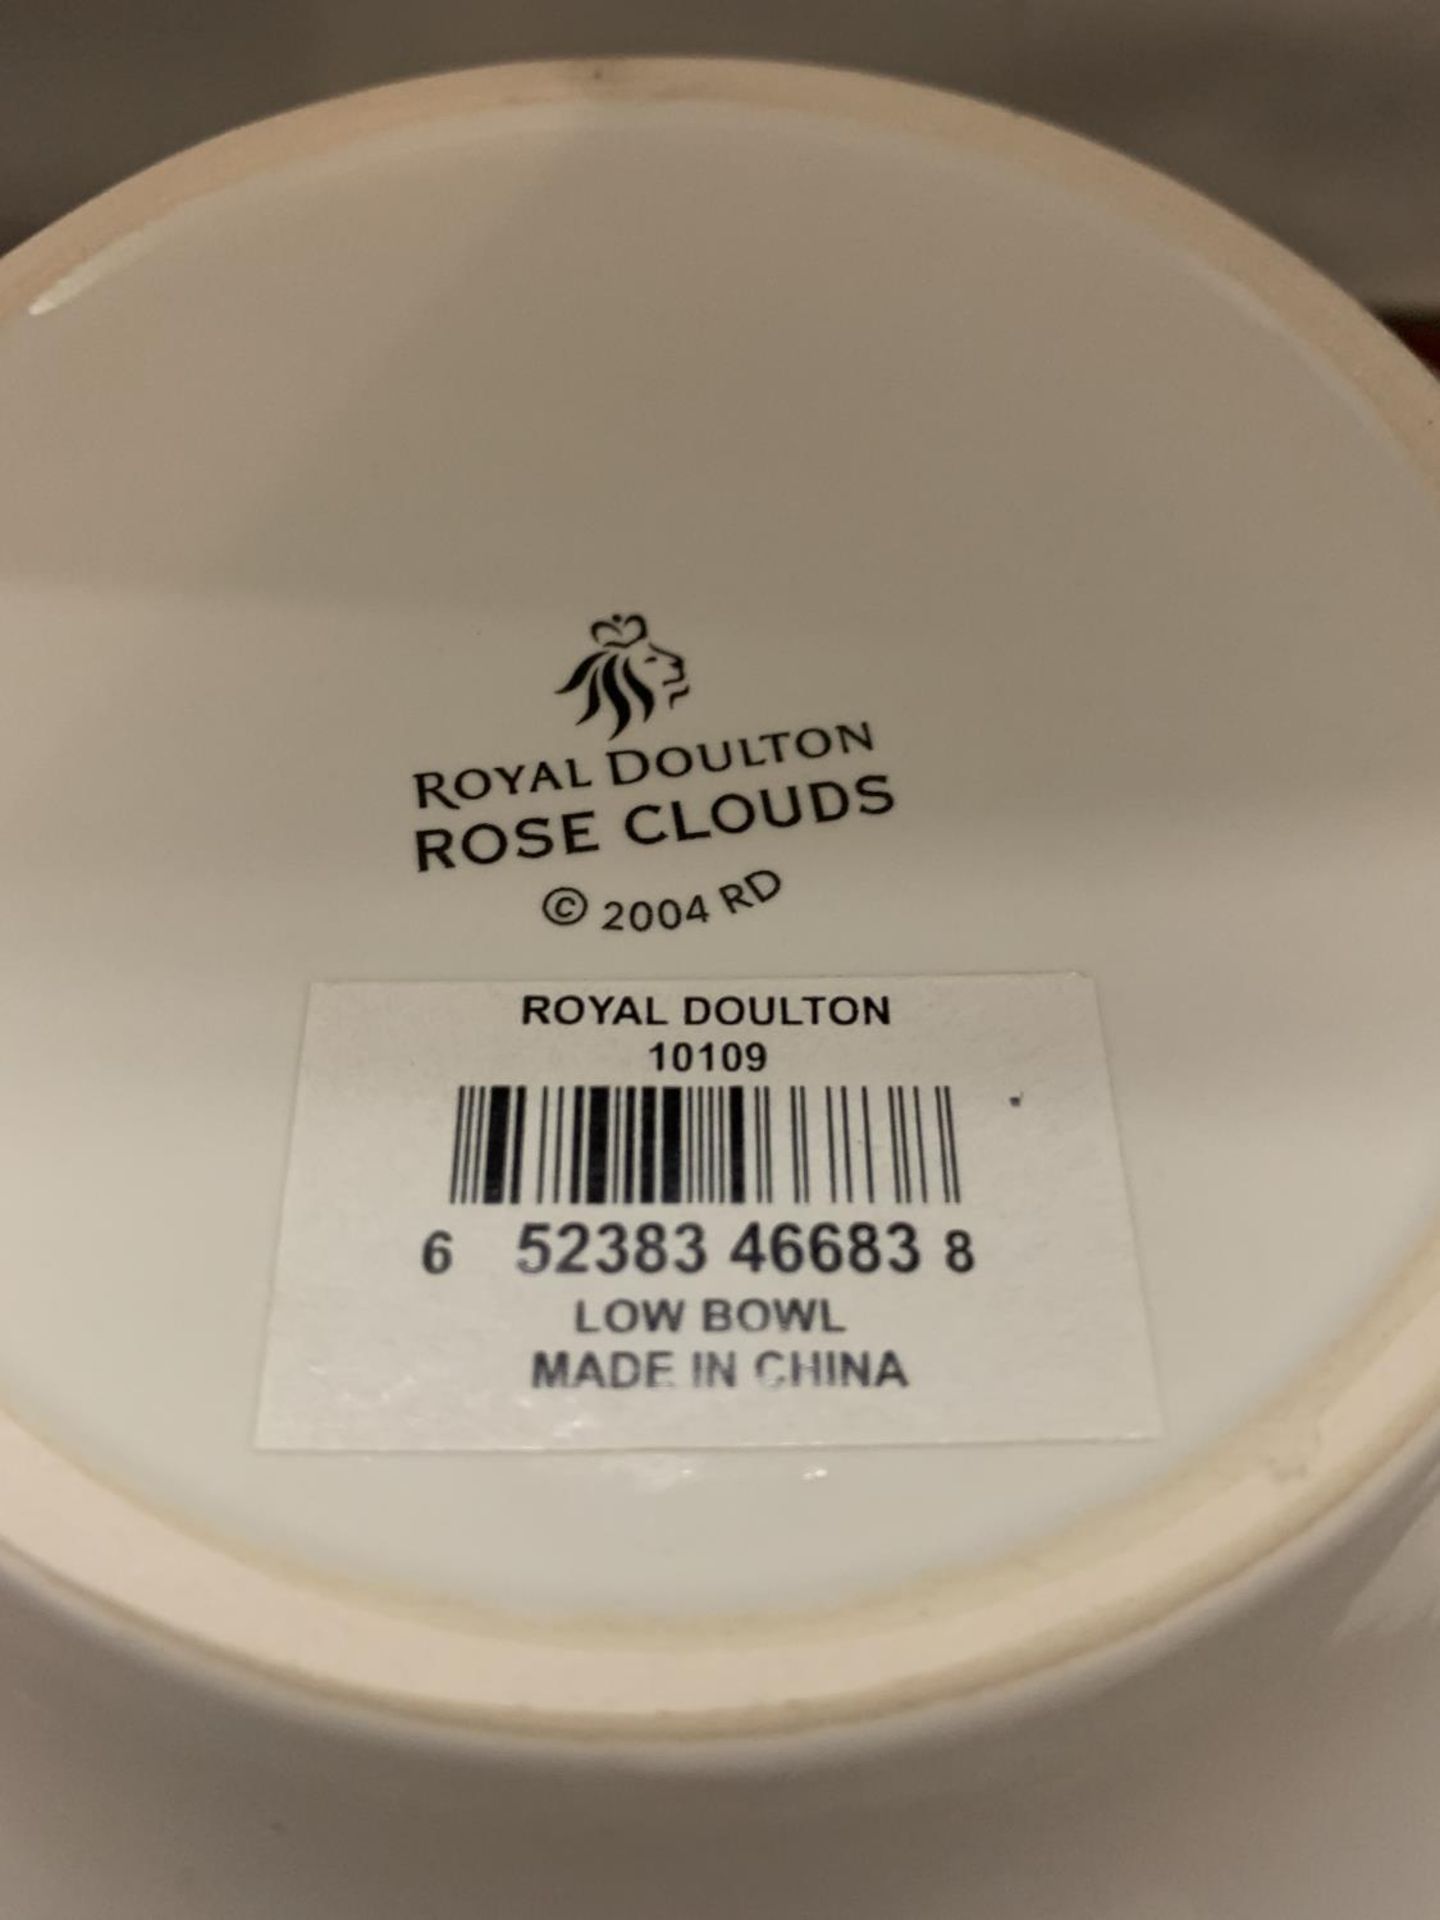 A ROYAL DOULTON ROSE CLOUDS LOW BOWL IN A PRESENTATION BOX - Image 6 of 6